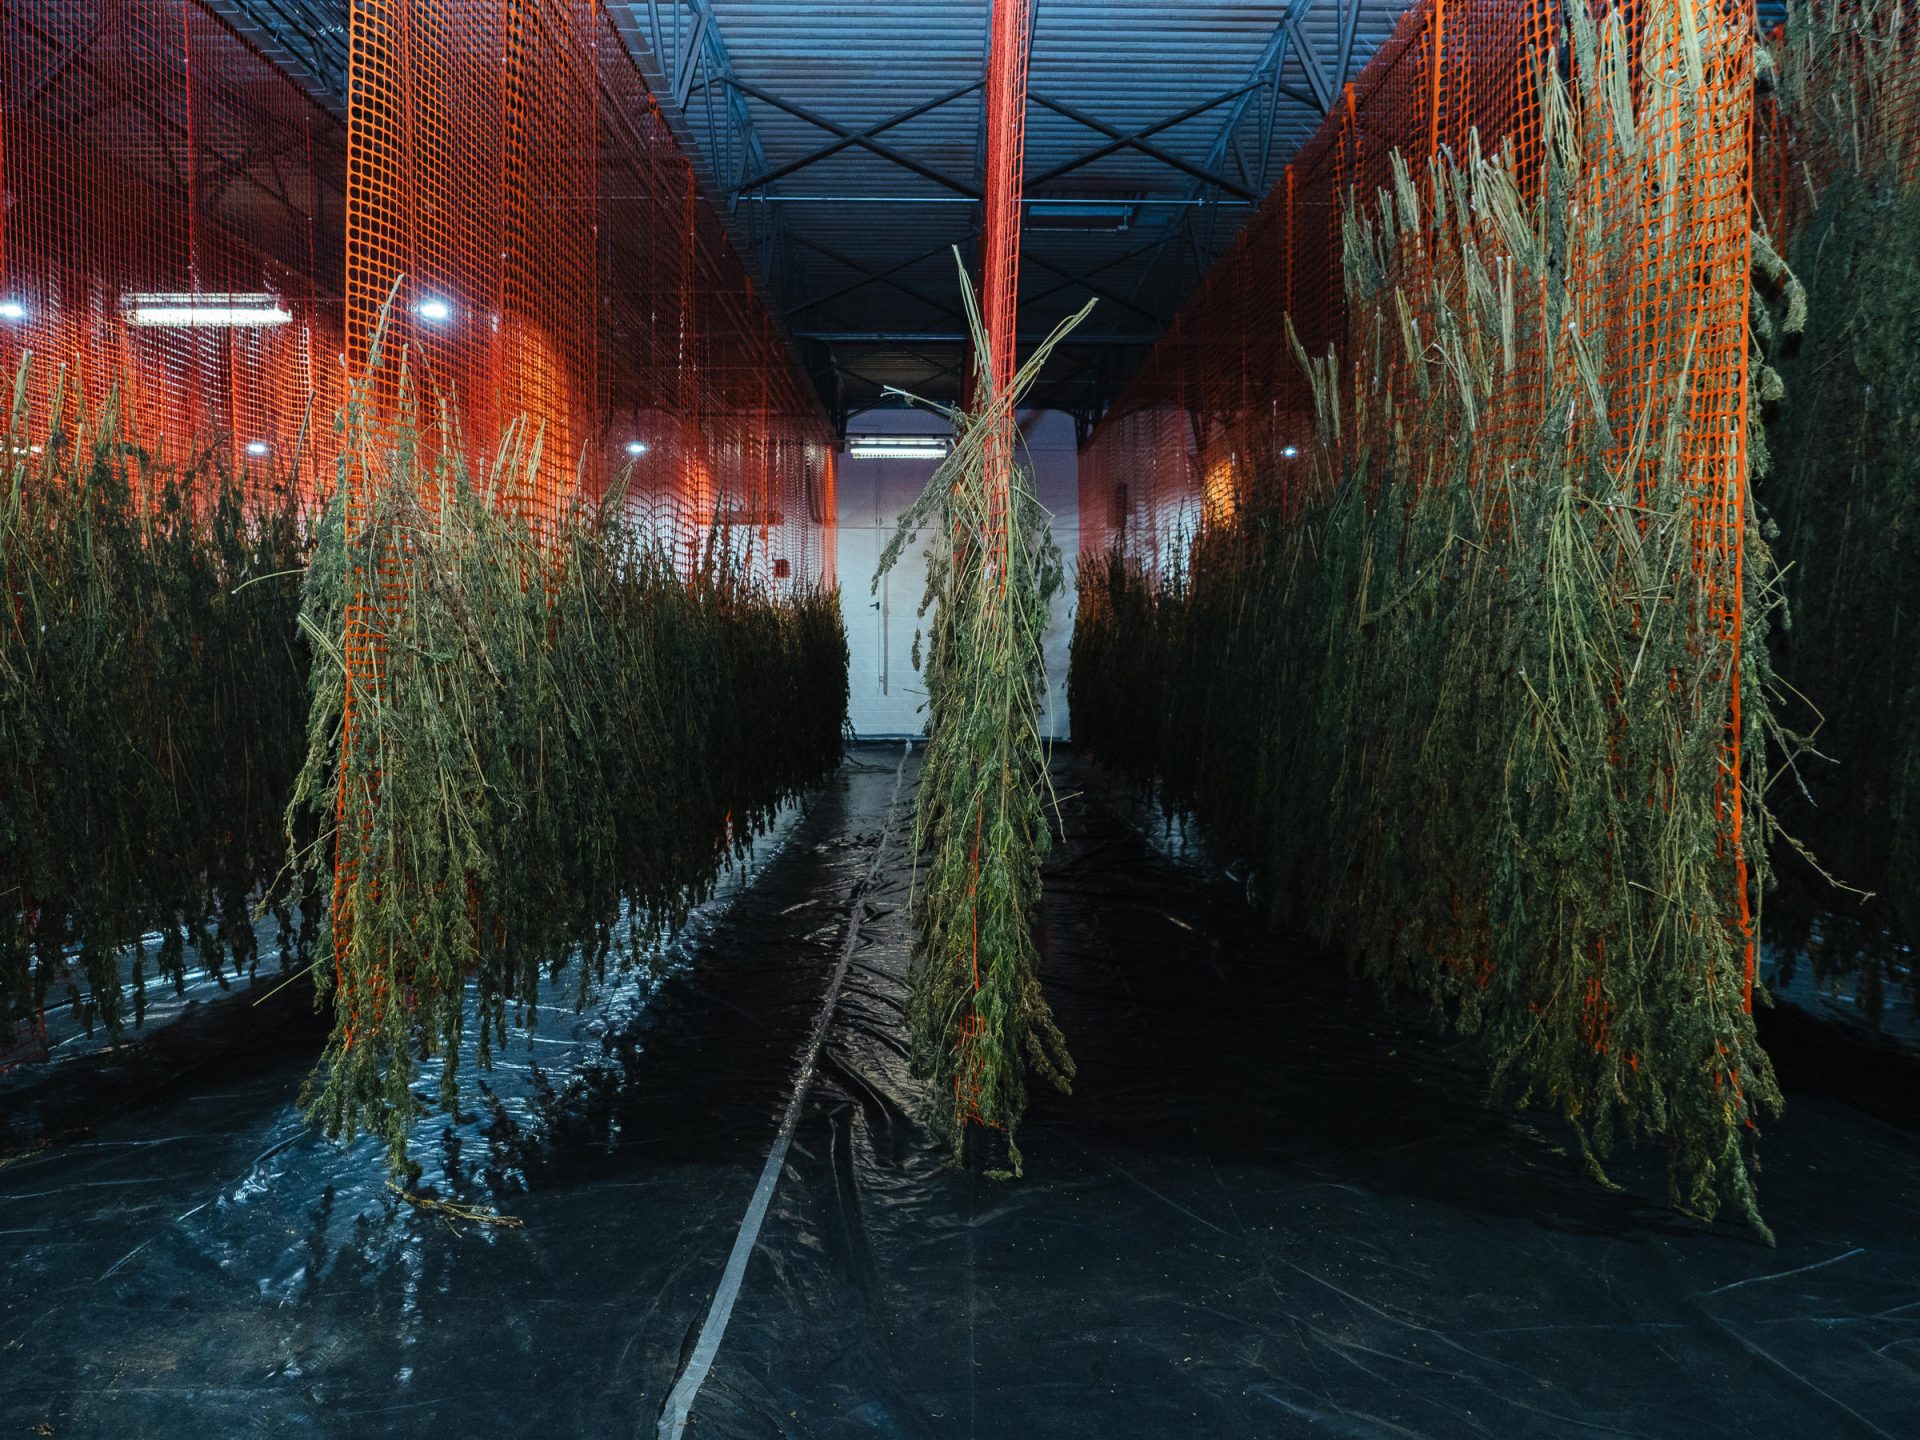 Drying hemp plants at AgraPharm's warehouse in Vanport, Pa.